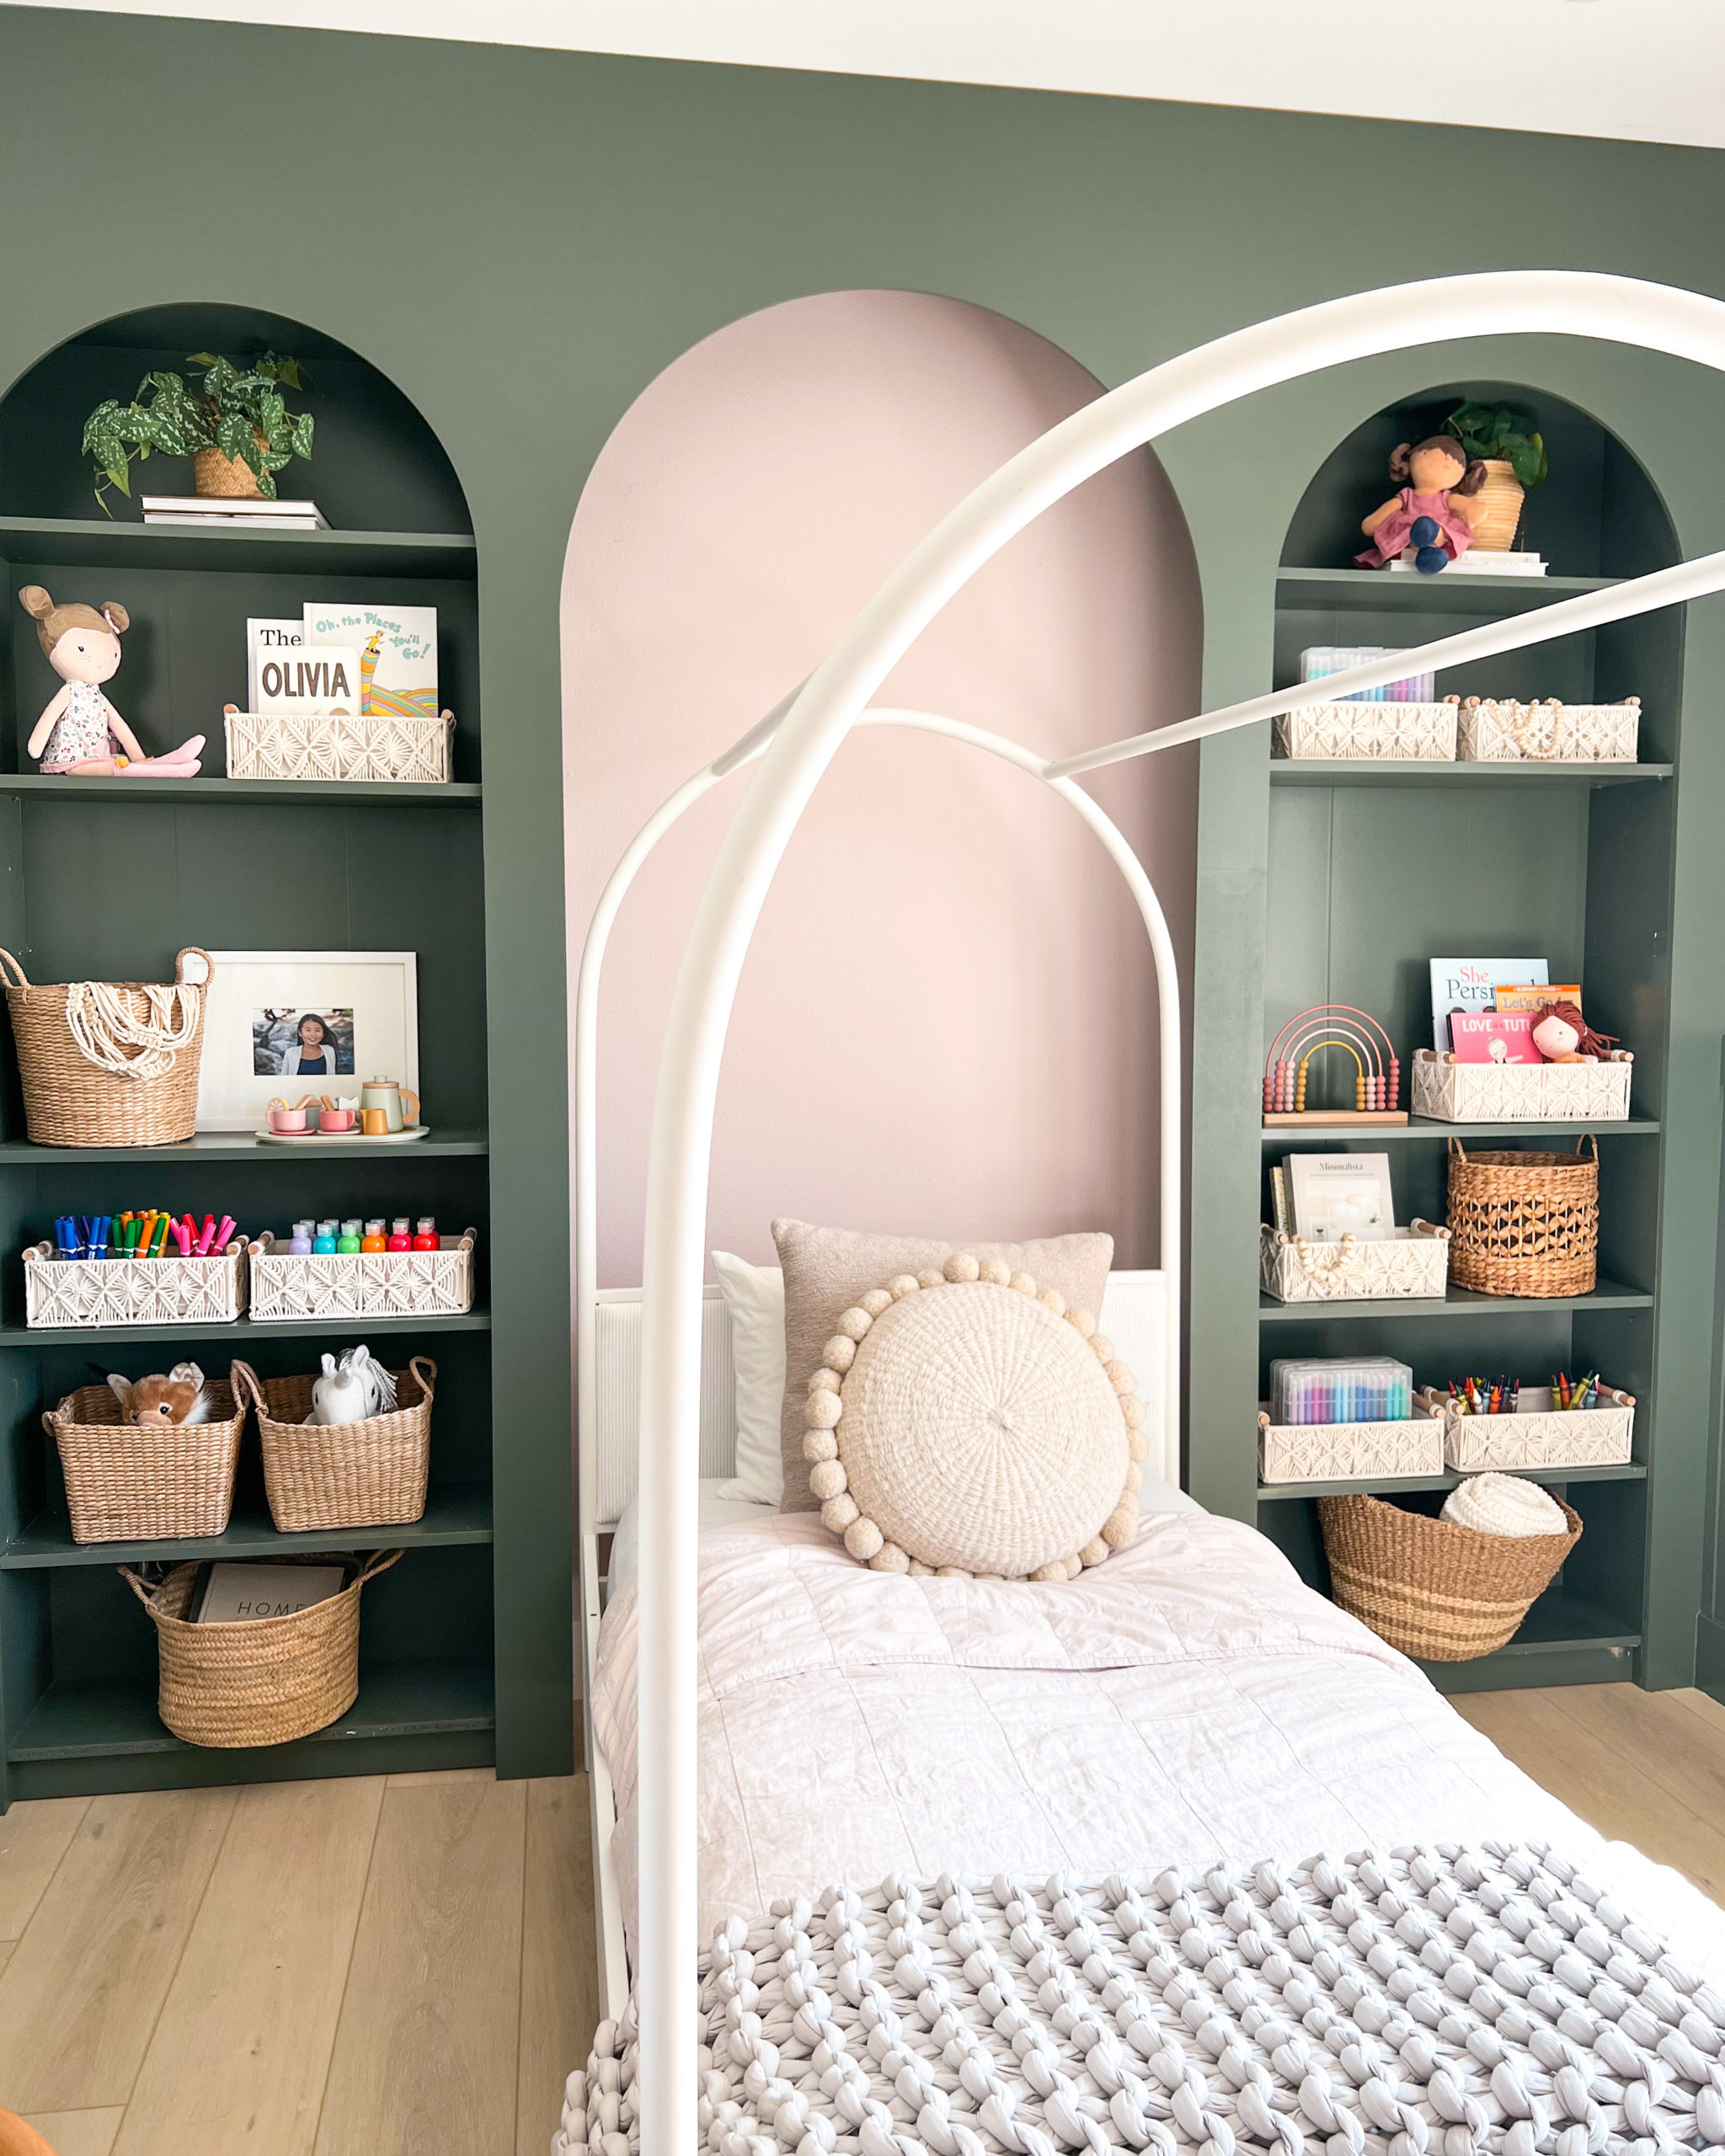 natalie's room is all organic arches and pale pink princess power